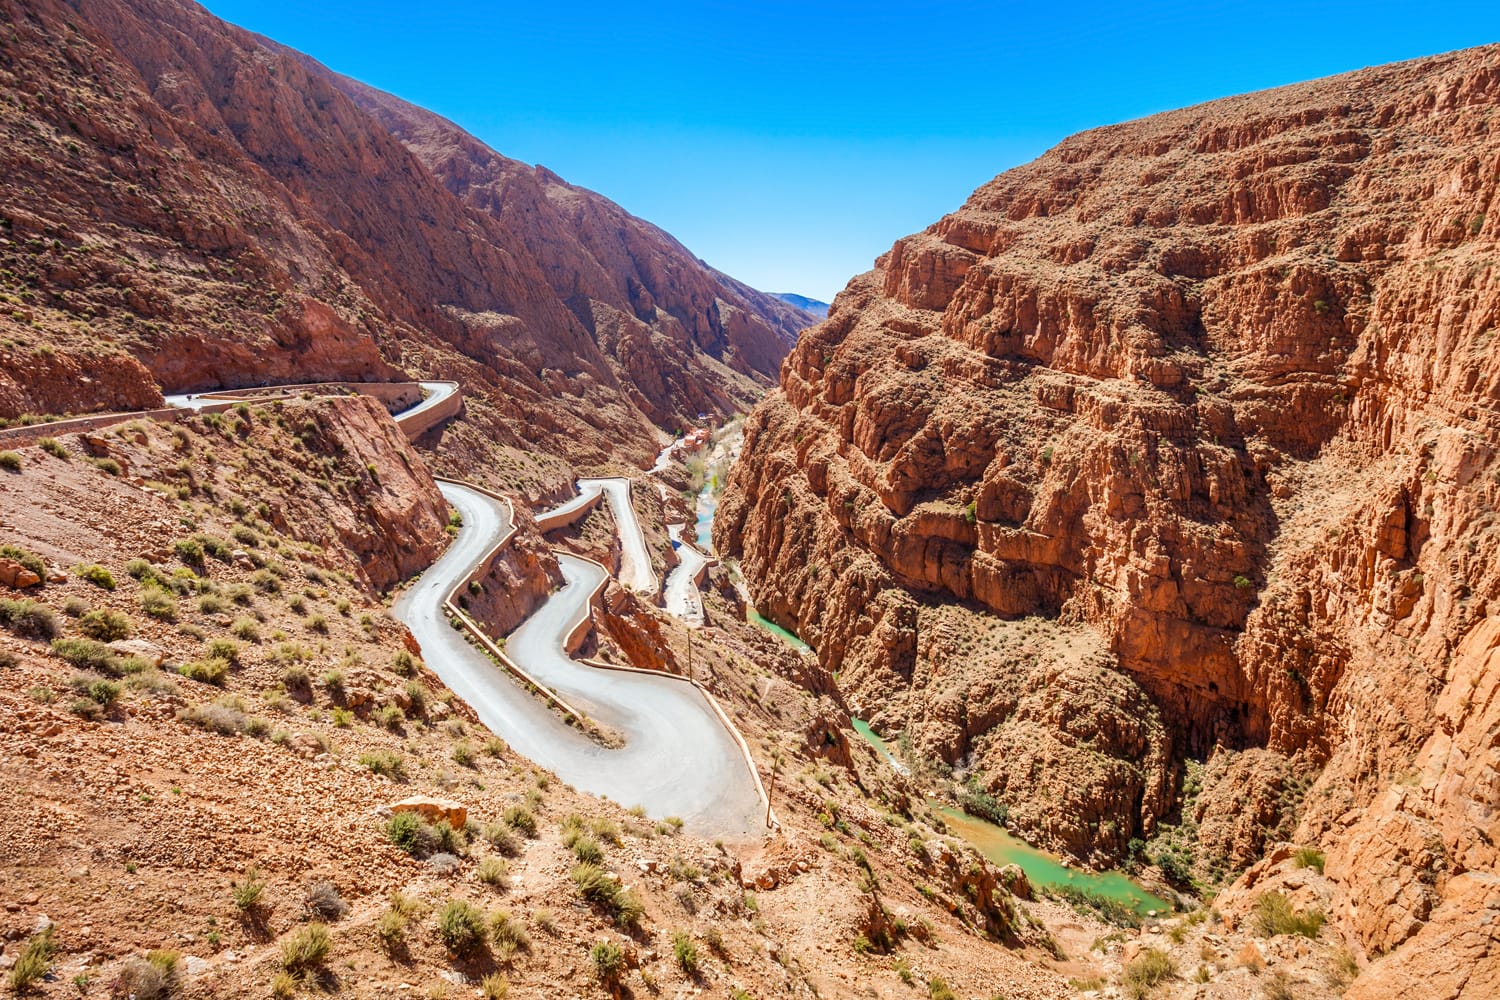 Dades Gorge is a gorge of Dades River in Atlas Mountains in Morocco